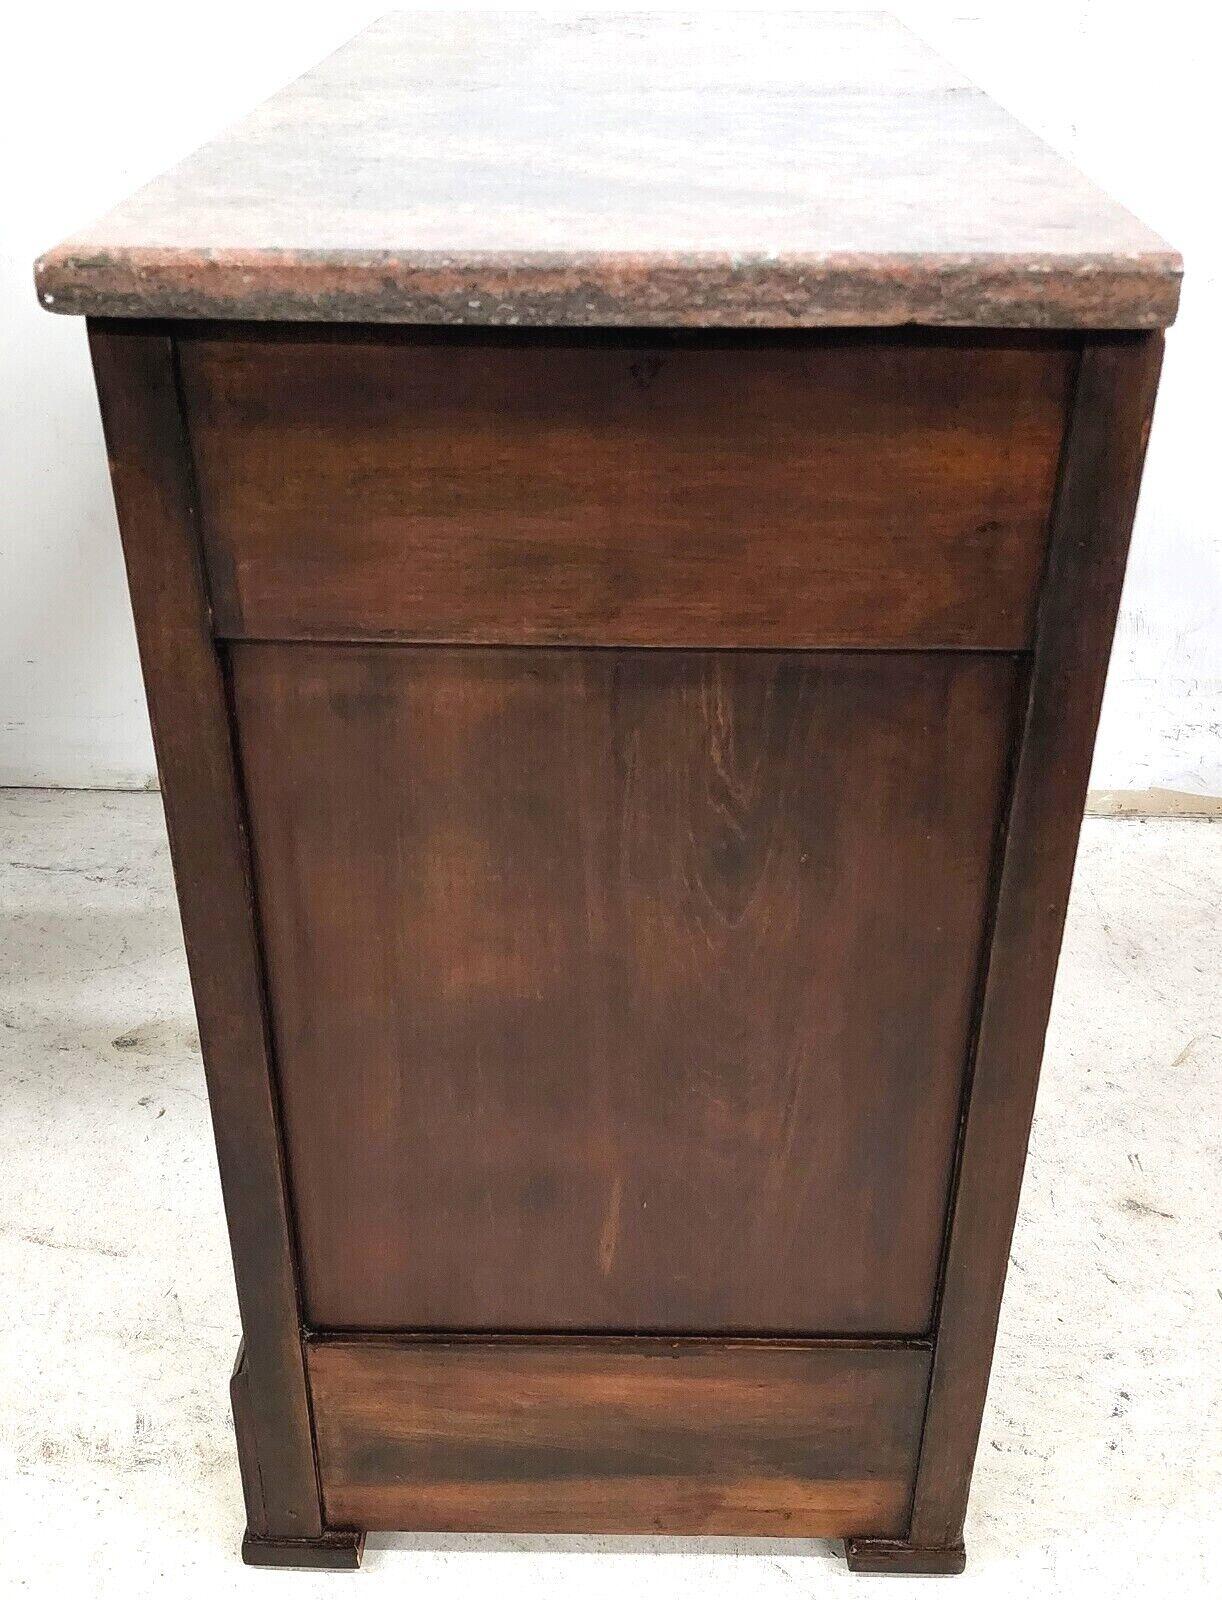 Antique 1800s French Country Granite Top Chest Of Drawers Dresser Nightstand In Good Condition For Sale In Lake Worth, FL